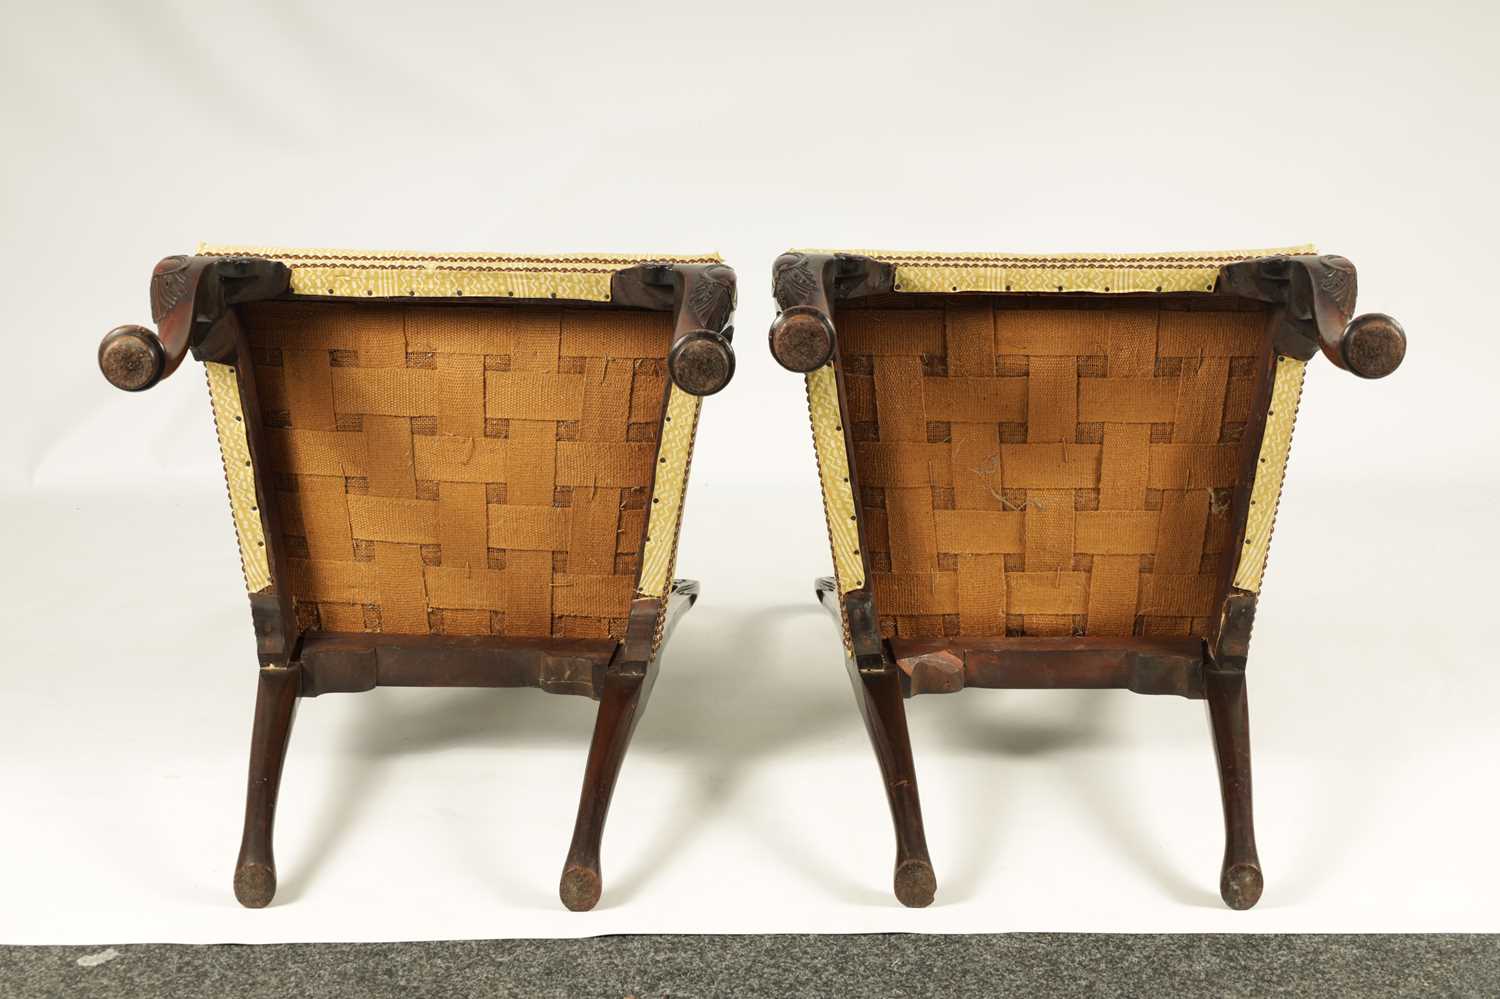 A FINE PAIR OF GEORGE II MAHOGANY UPHOLSTERED SIDE CHAIRS OF GENEROUS SIZE - Image 8 of 10